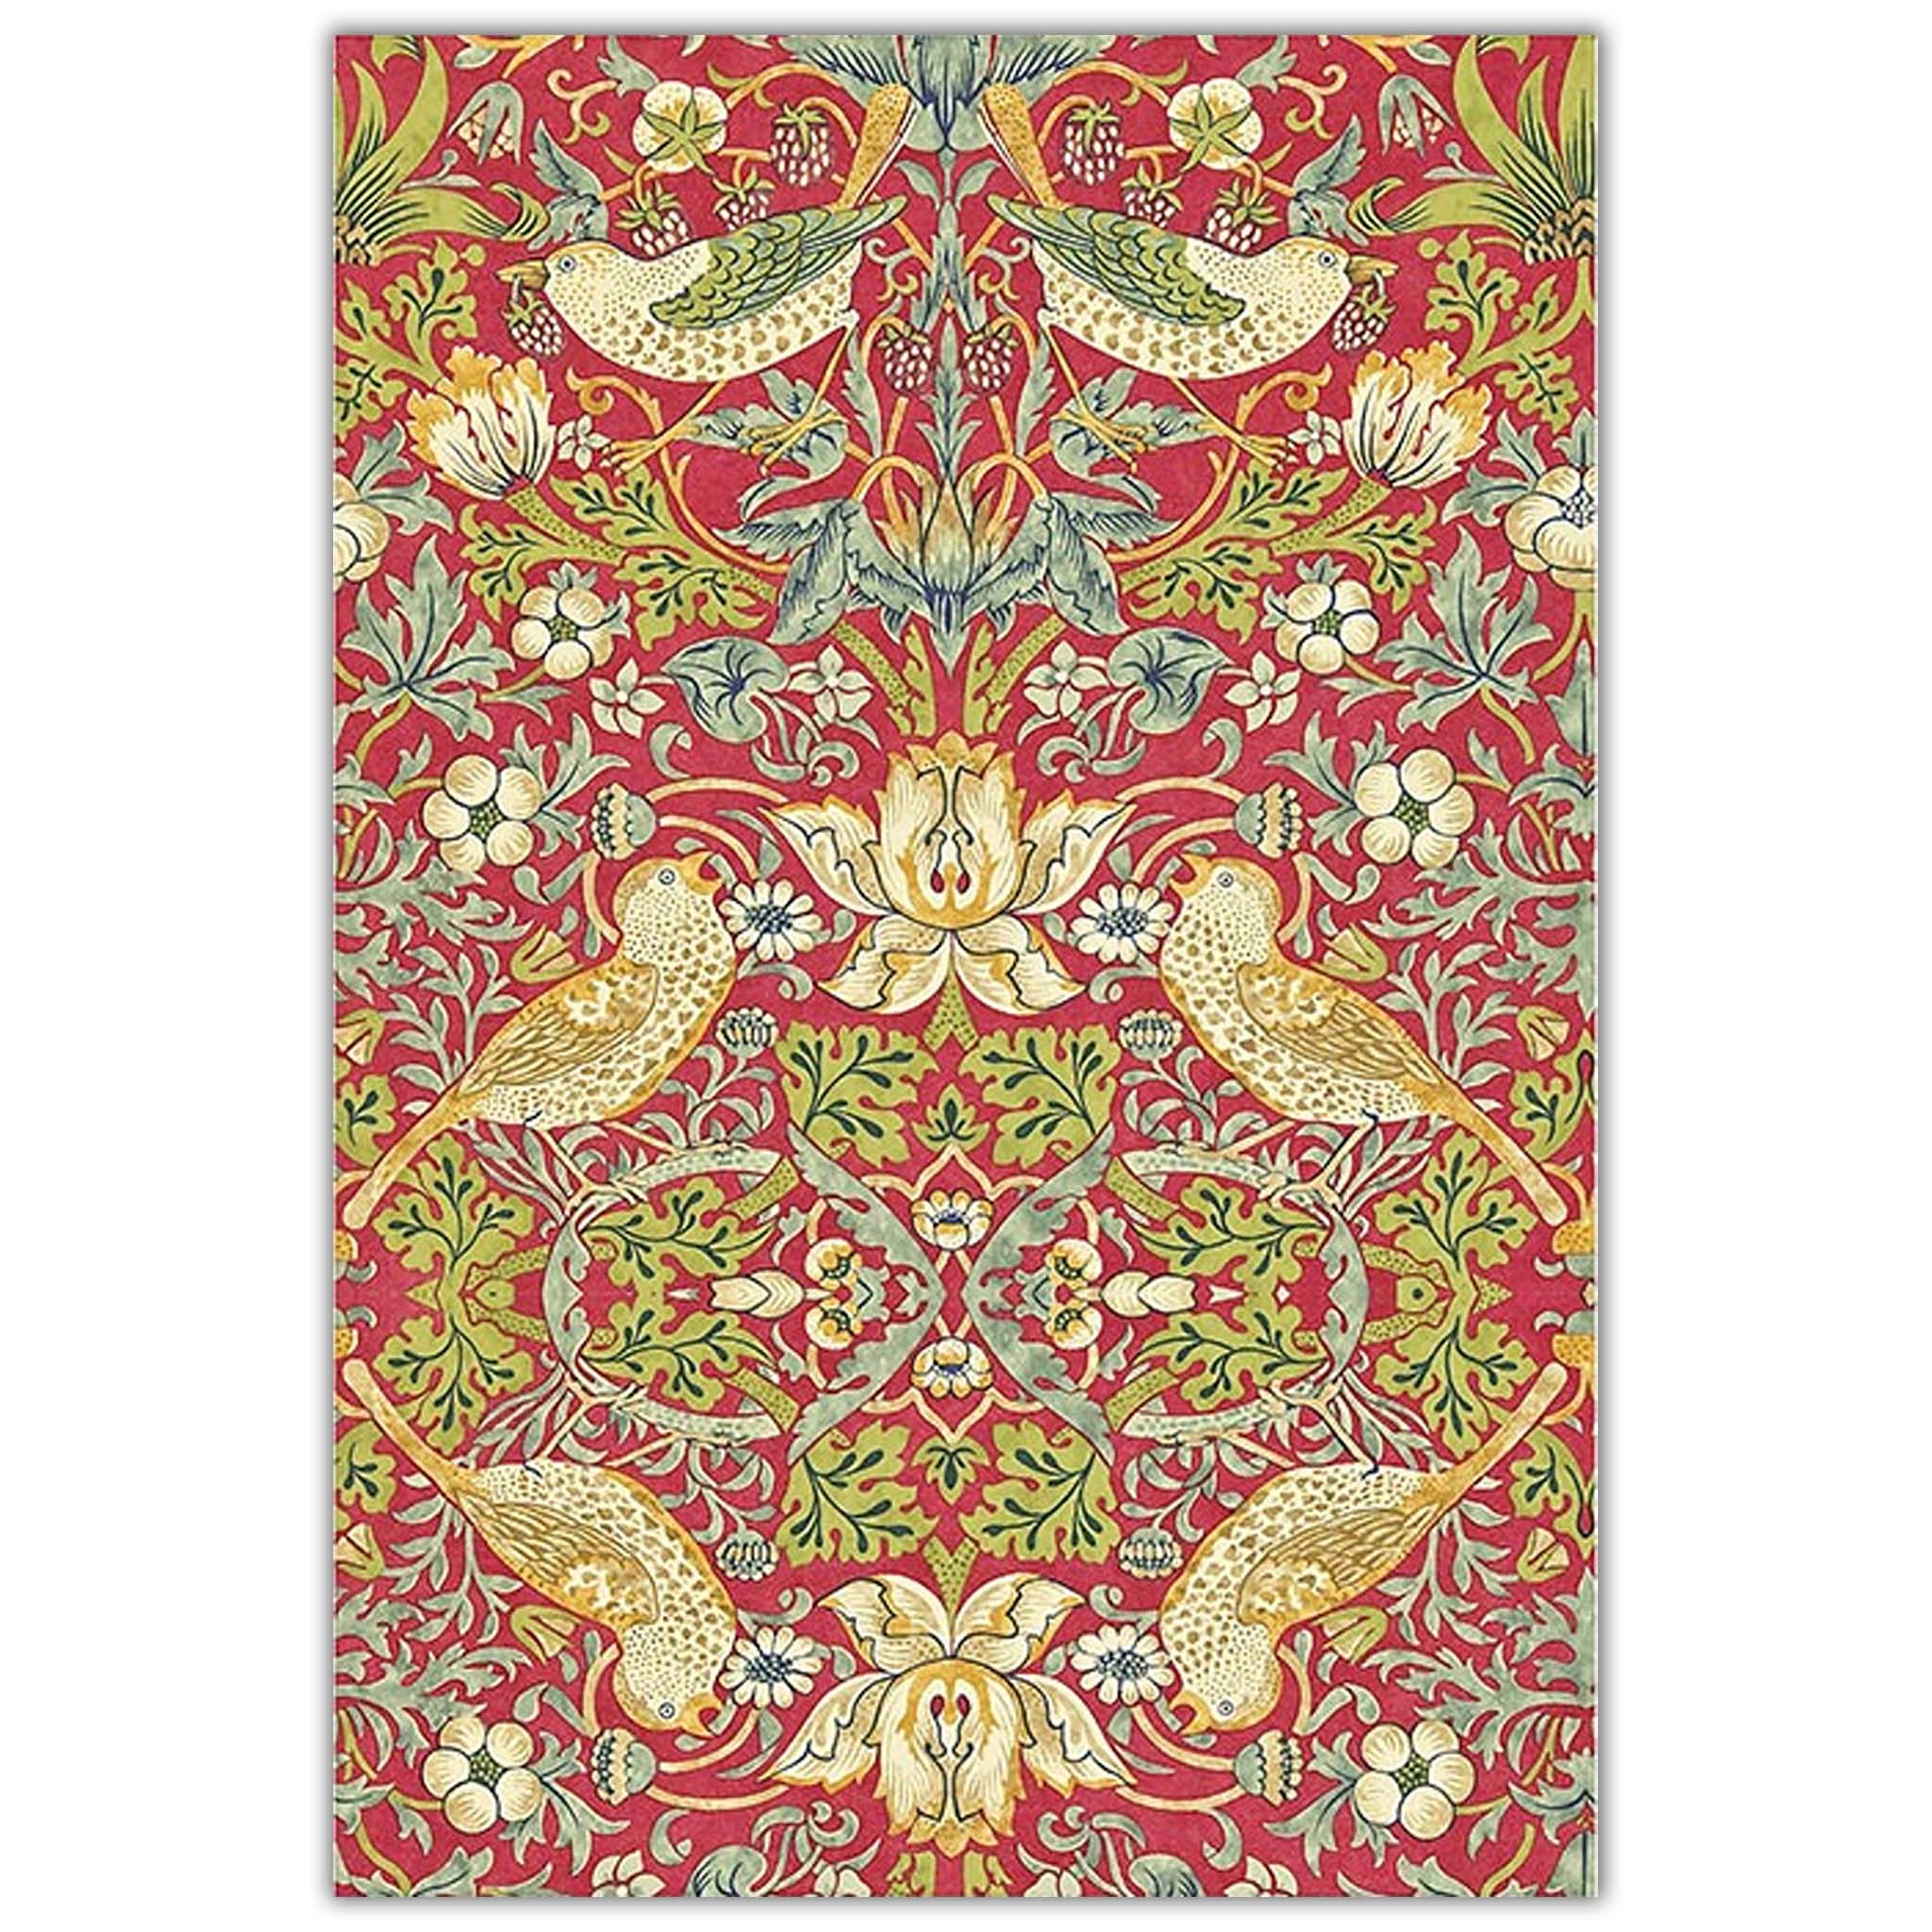 A2 rice paper design that features a vibrant red backdrop adorned with birds and flowers in a vivid blend of blues, olives, and mustards. White borders are on the sides.